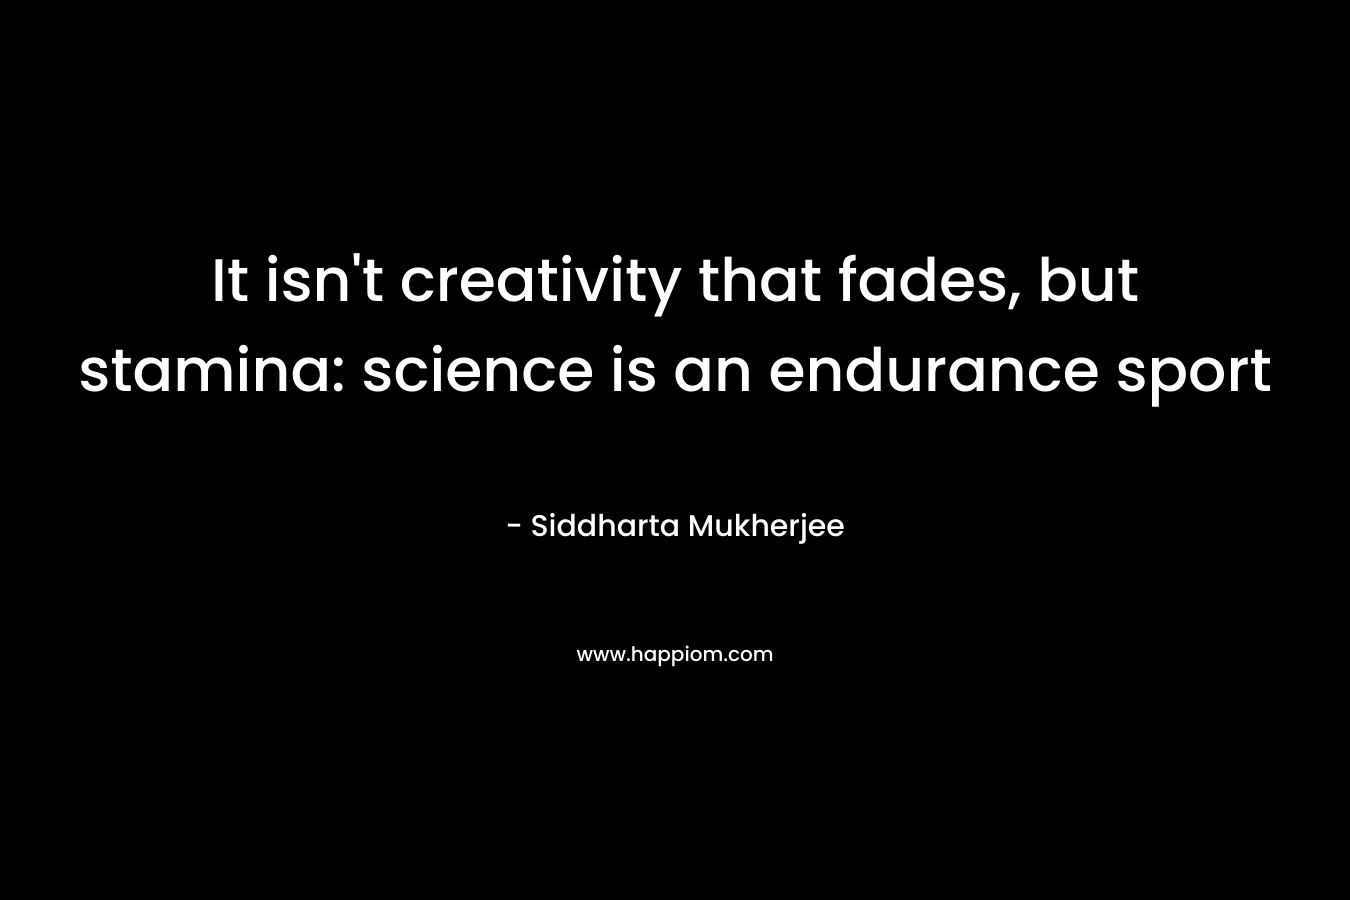 It isn't creativity that fades, but stamina: science is an endurance sport